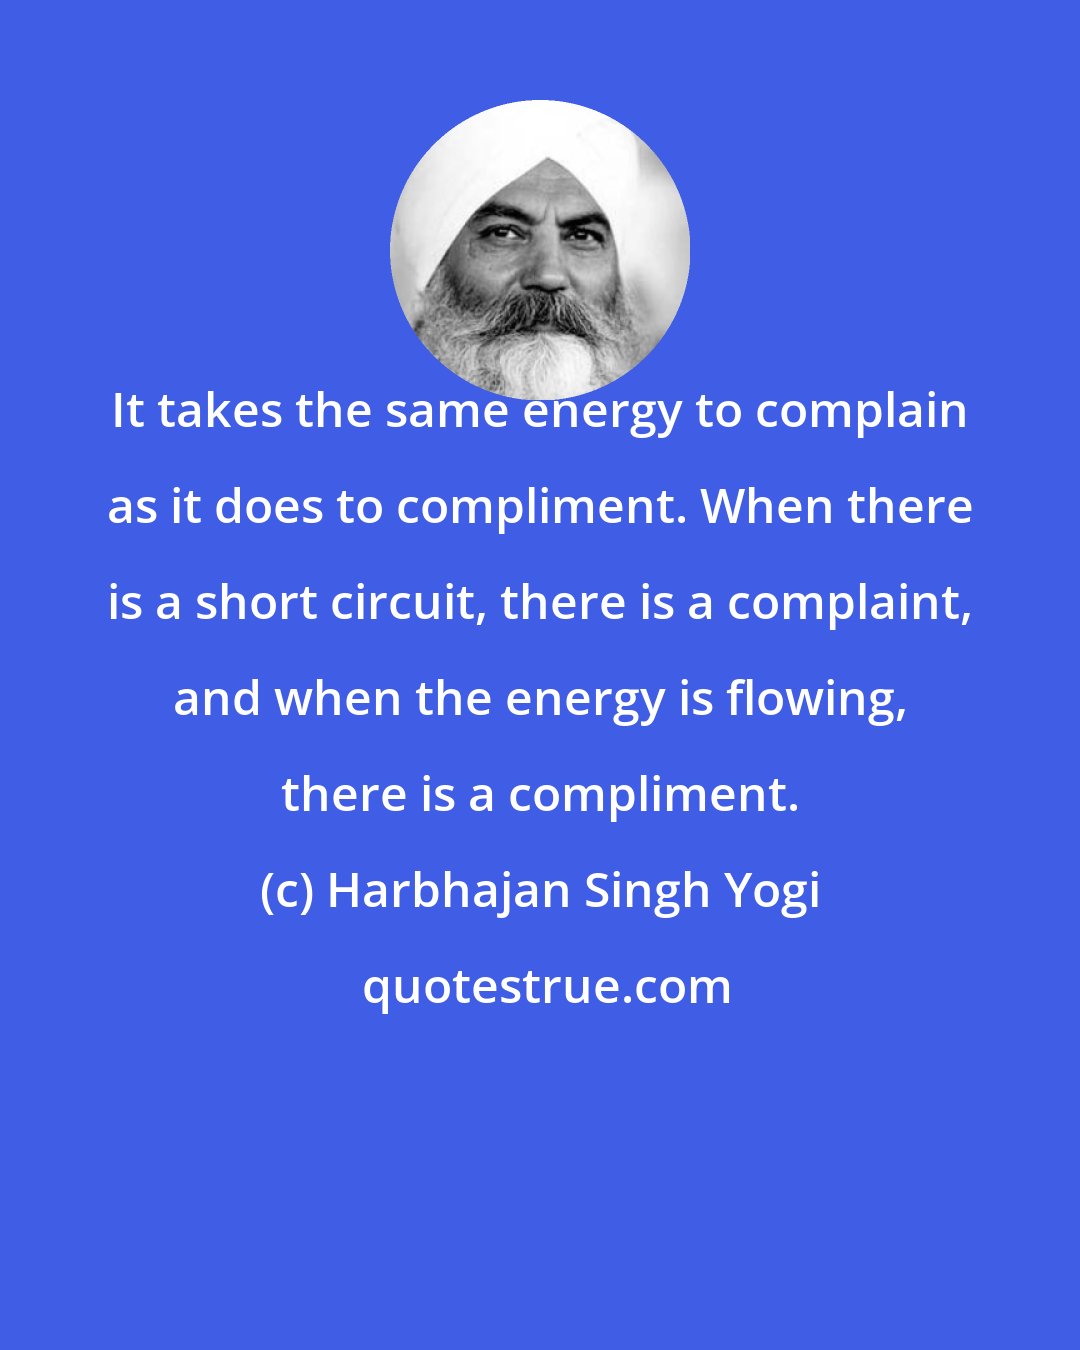 Harbhajan Singh Yogi: It takes the same energy to complain as it does to compliment. When there is a short circuit, there is a complaint, and when the energy is flowing, there is a compliment.